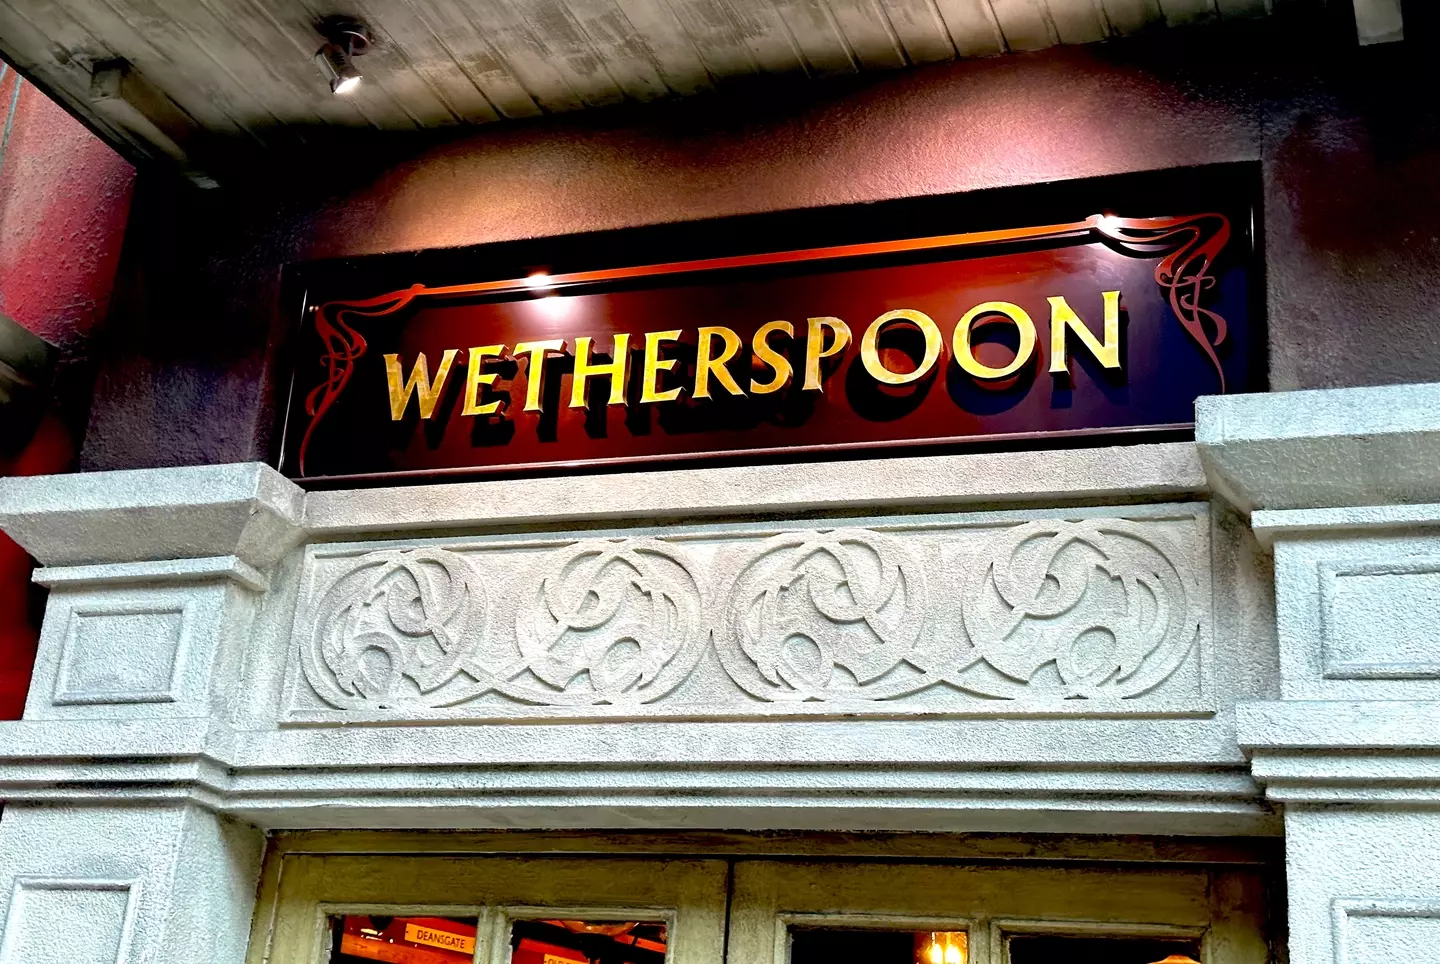 Another 28 Wetherspoons are also set to close.